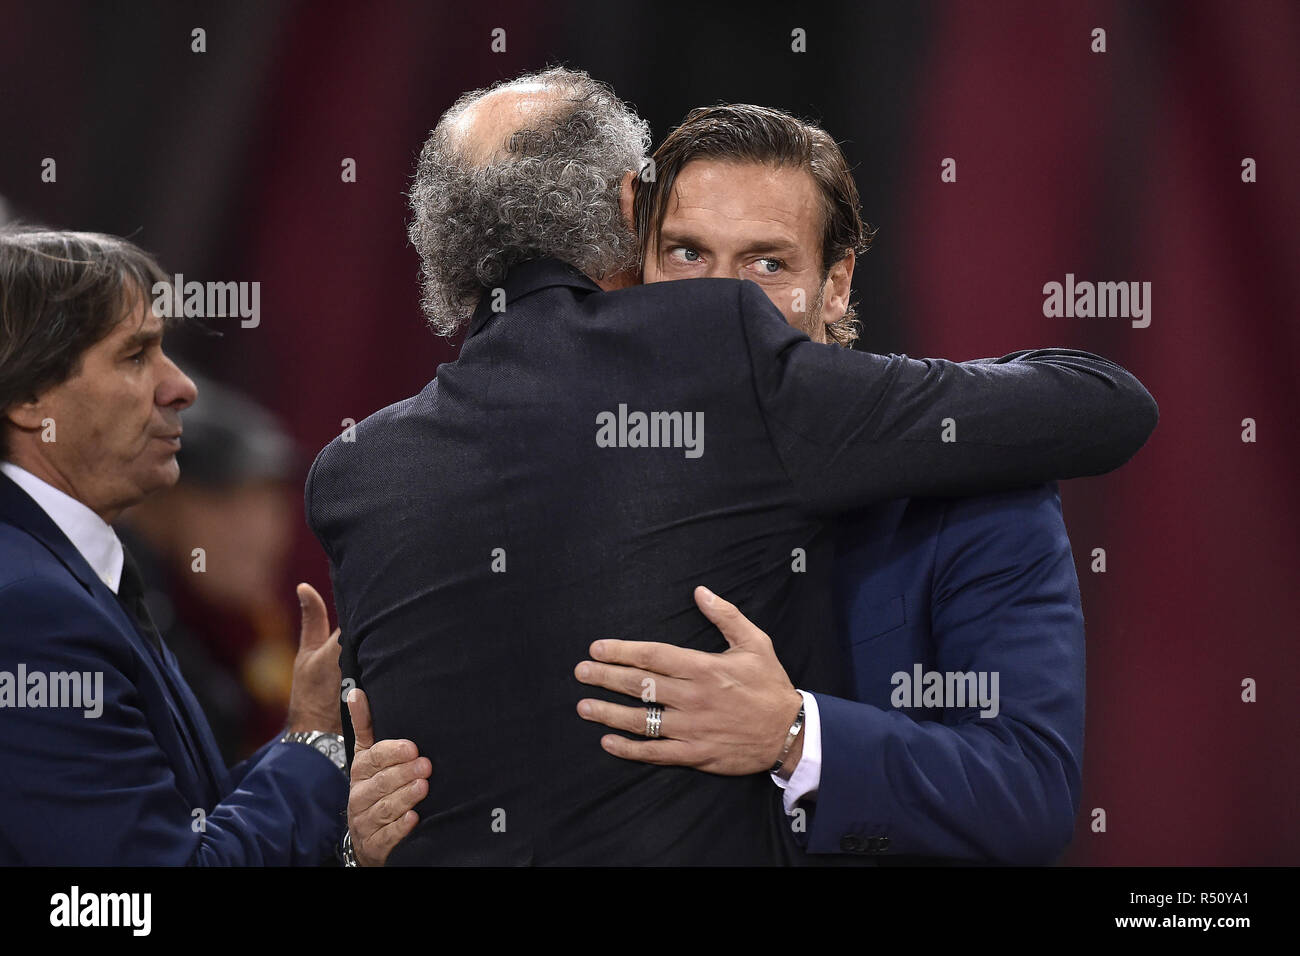 Rome, Italy. 27th Nov, 2018. AS Roma former player Francesco Totti hugs AS Roma former player Paulo Roberto Falcao before the UEFA Champions League match between Roma and Real Madrid at Stadio Olimpico, Rome, Italy on 27 November 2018. Credit: Giuseppe Maffia/Pacific Press/Alamy Live News Stock Photo